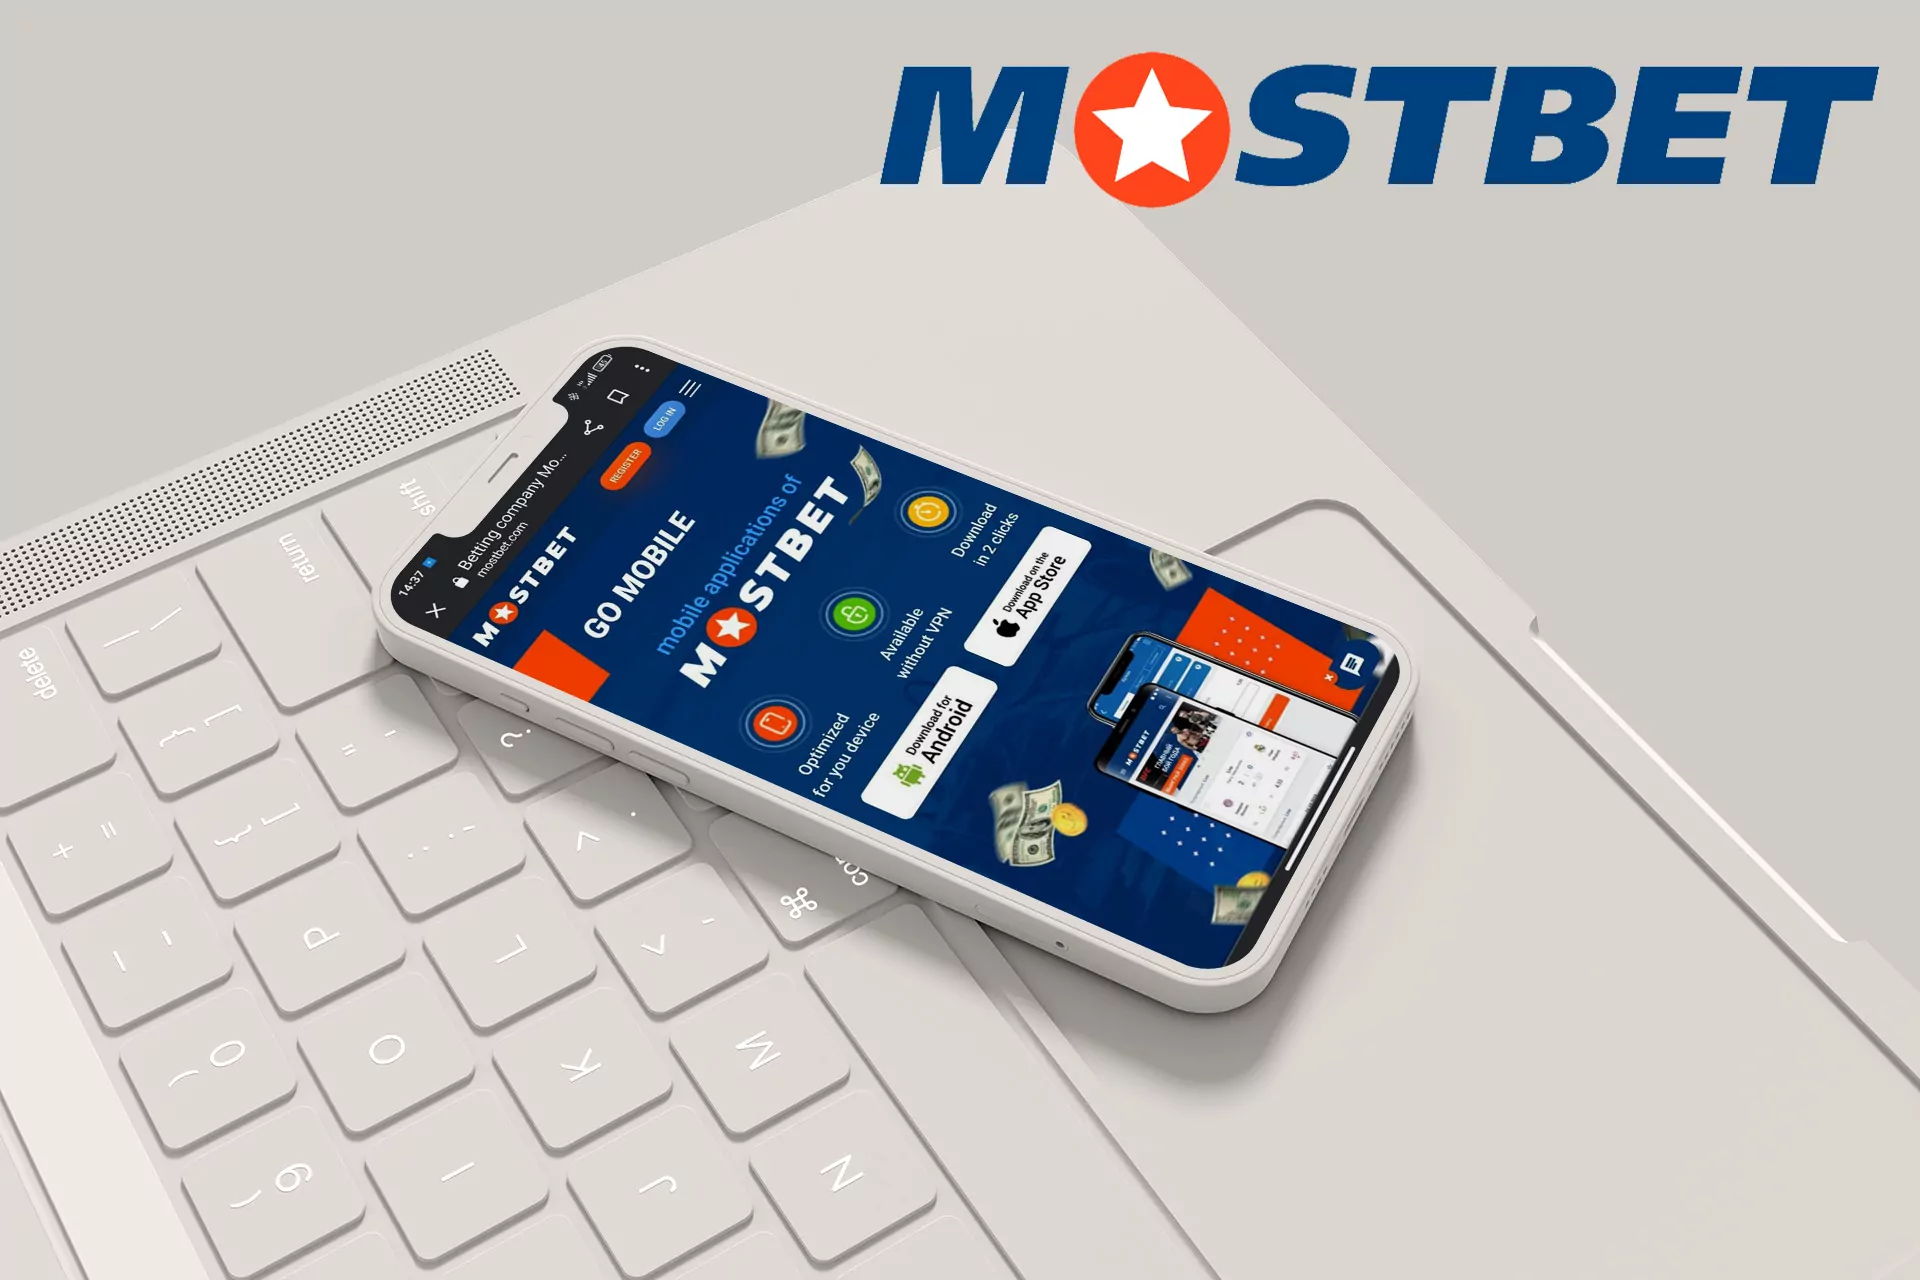 If you do not want to install any soft, you can still bet via you phone with the help of Mostbet's mobile version.